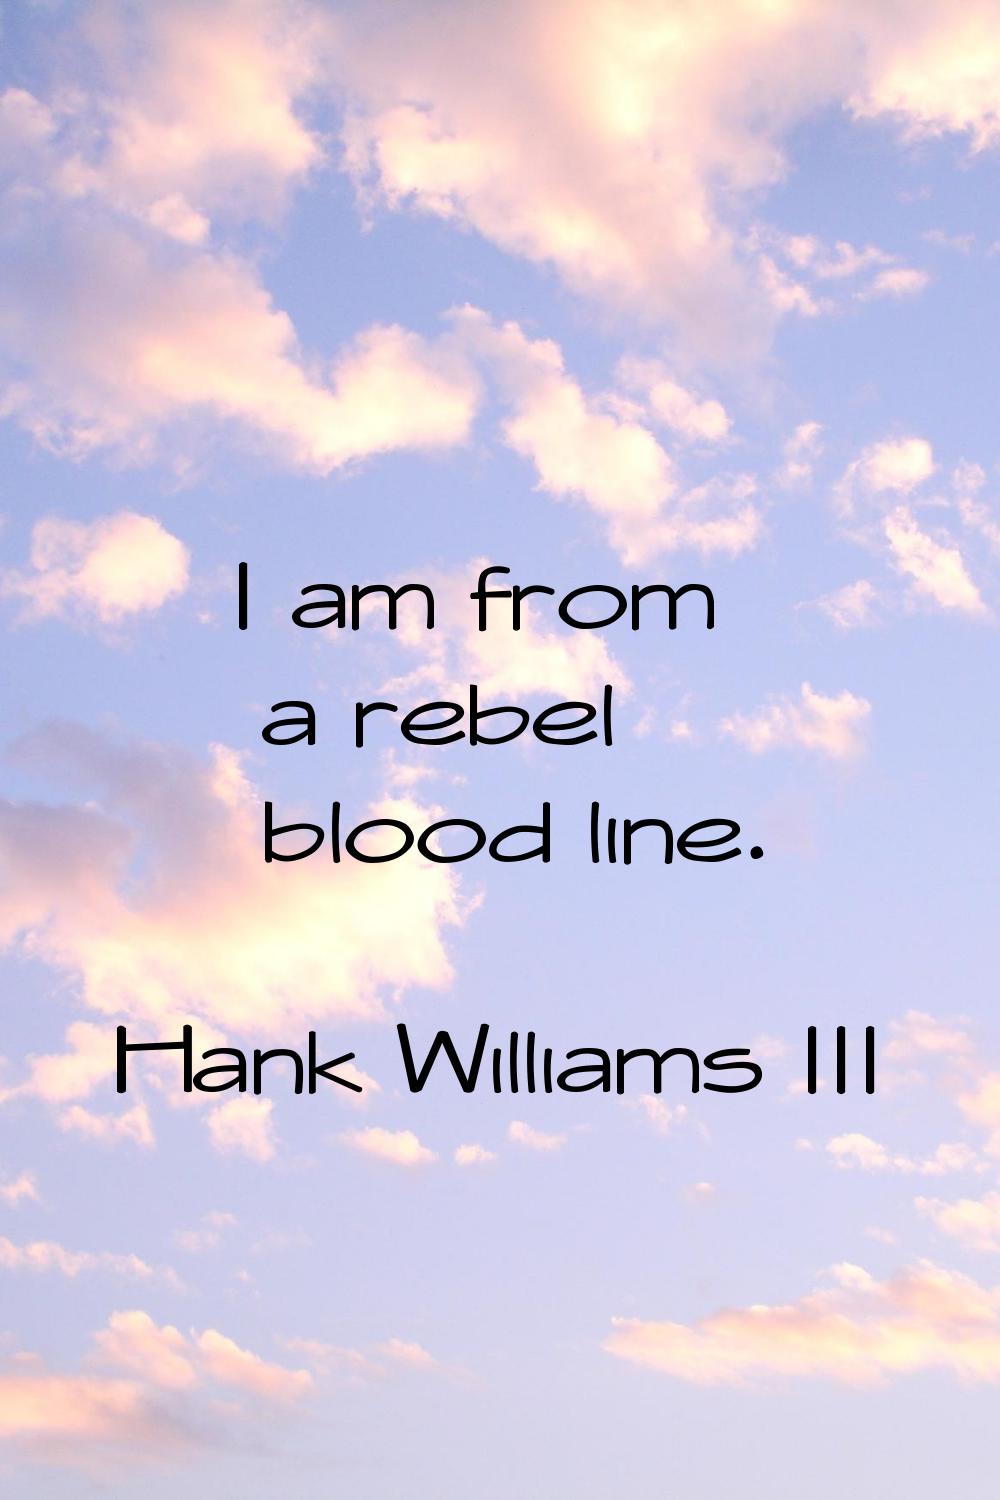 I am from a rebel blood line.